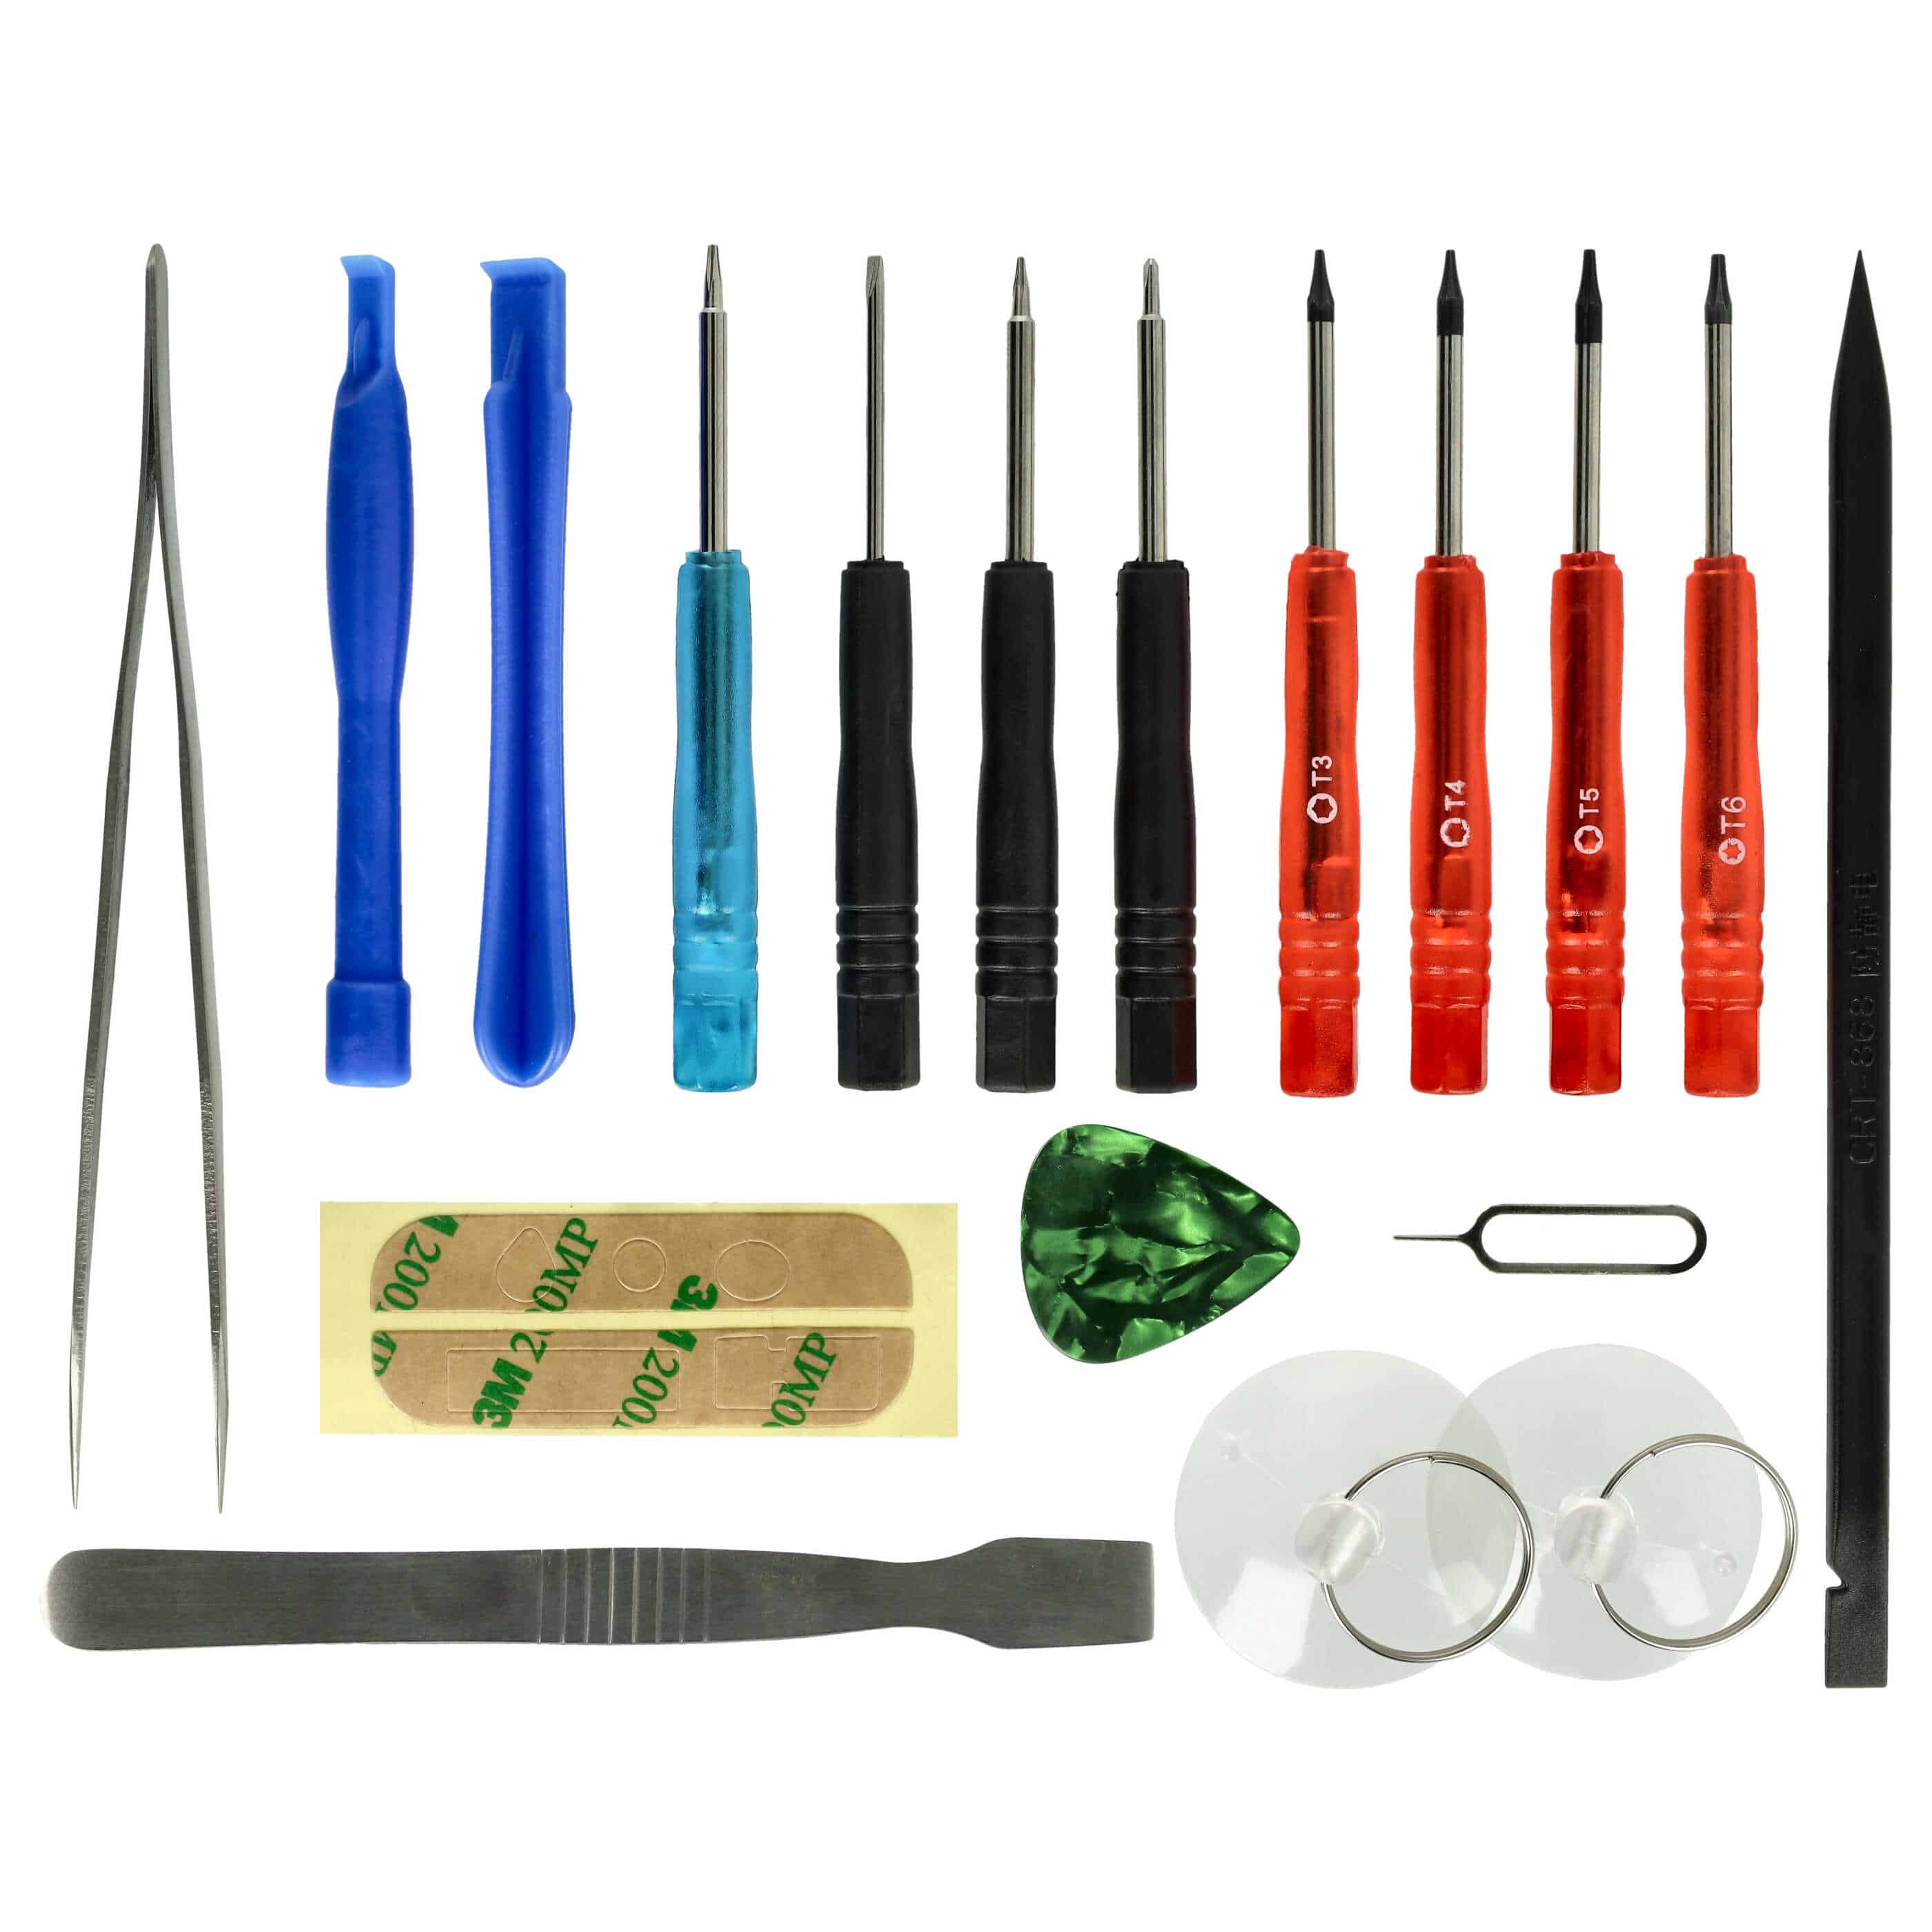 Tool Kit 18 Part with Screwdrivers, Suction Cup, Tweezers, Opening Tools, Adhesive for Smartphones, PCs